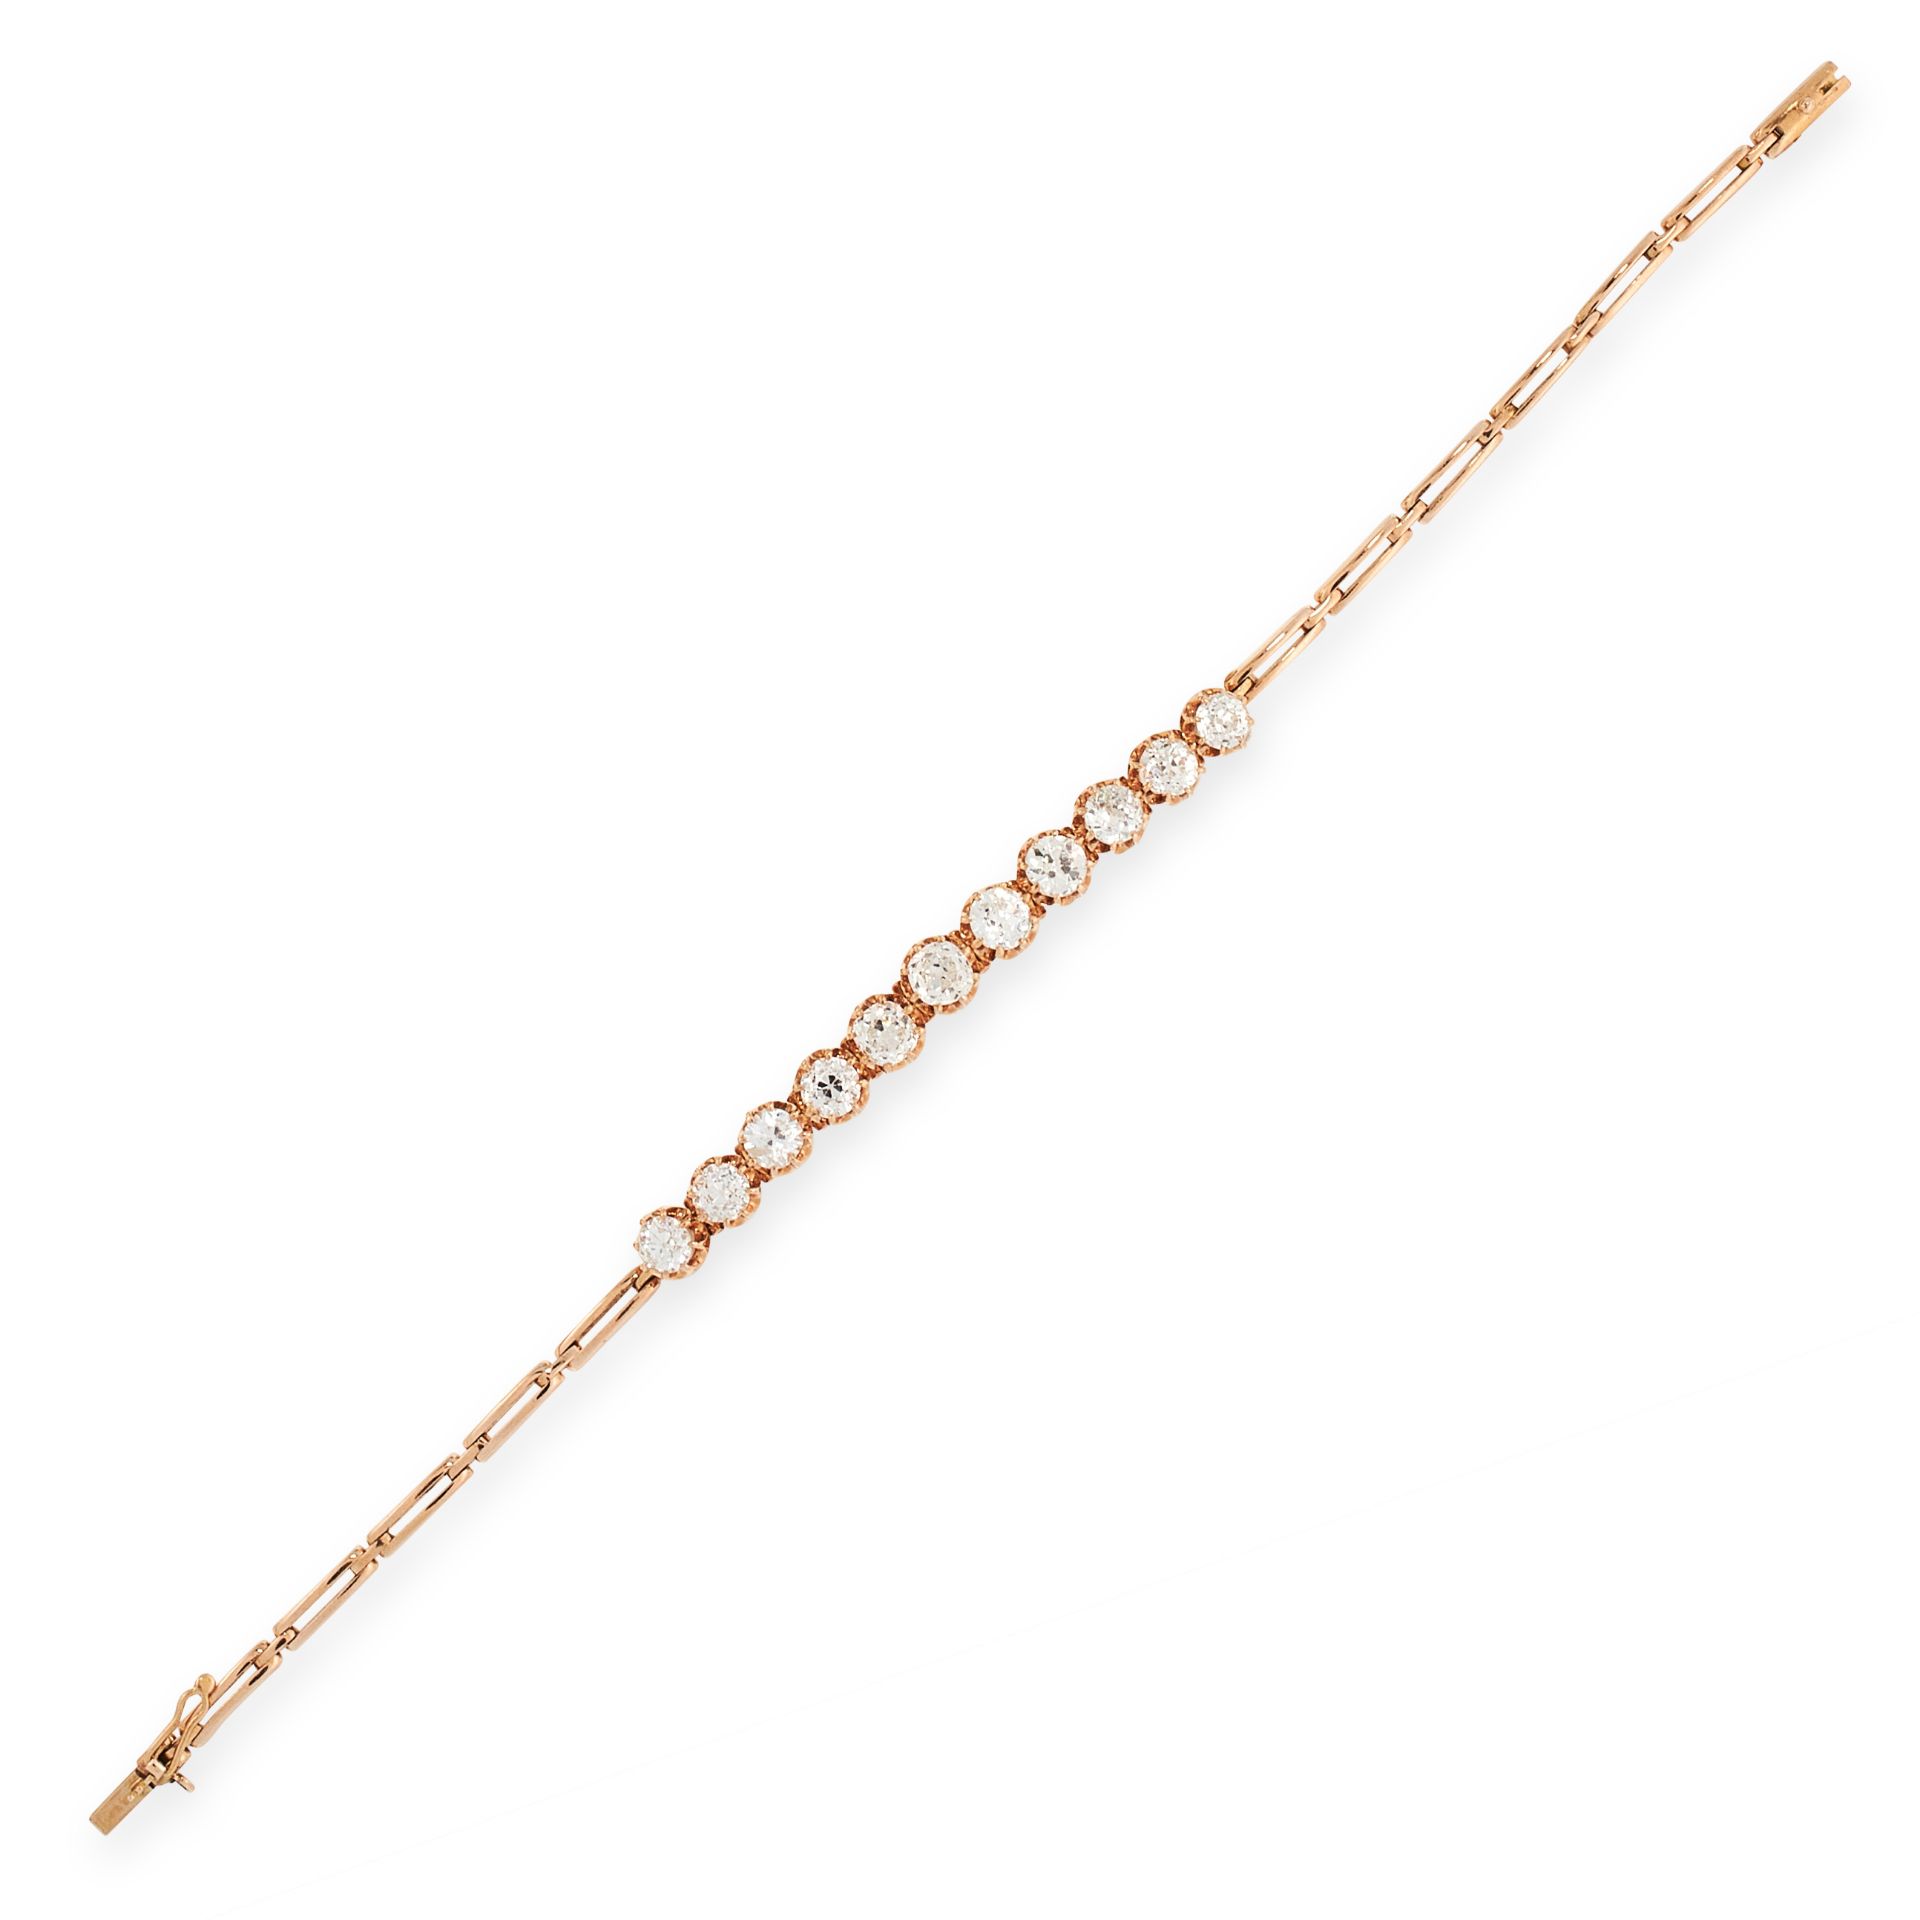 A DIAMOND BRACELET, EARLY 20TH CENTURY in high carat yellow gold, set with a row of eleven graduated